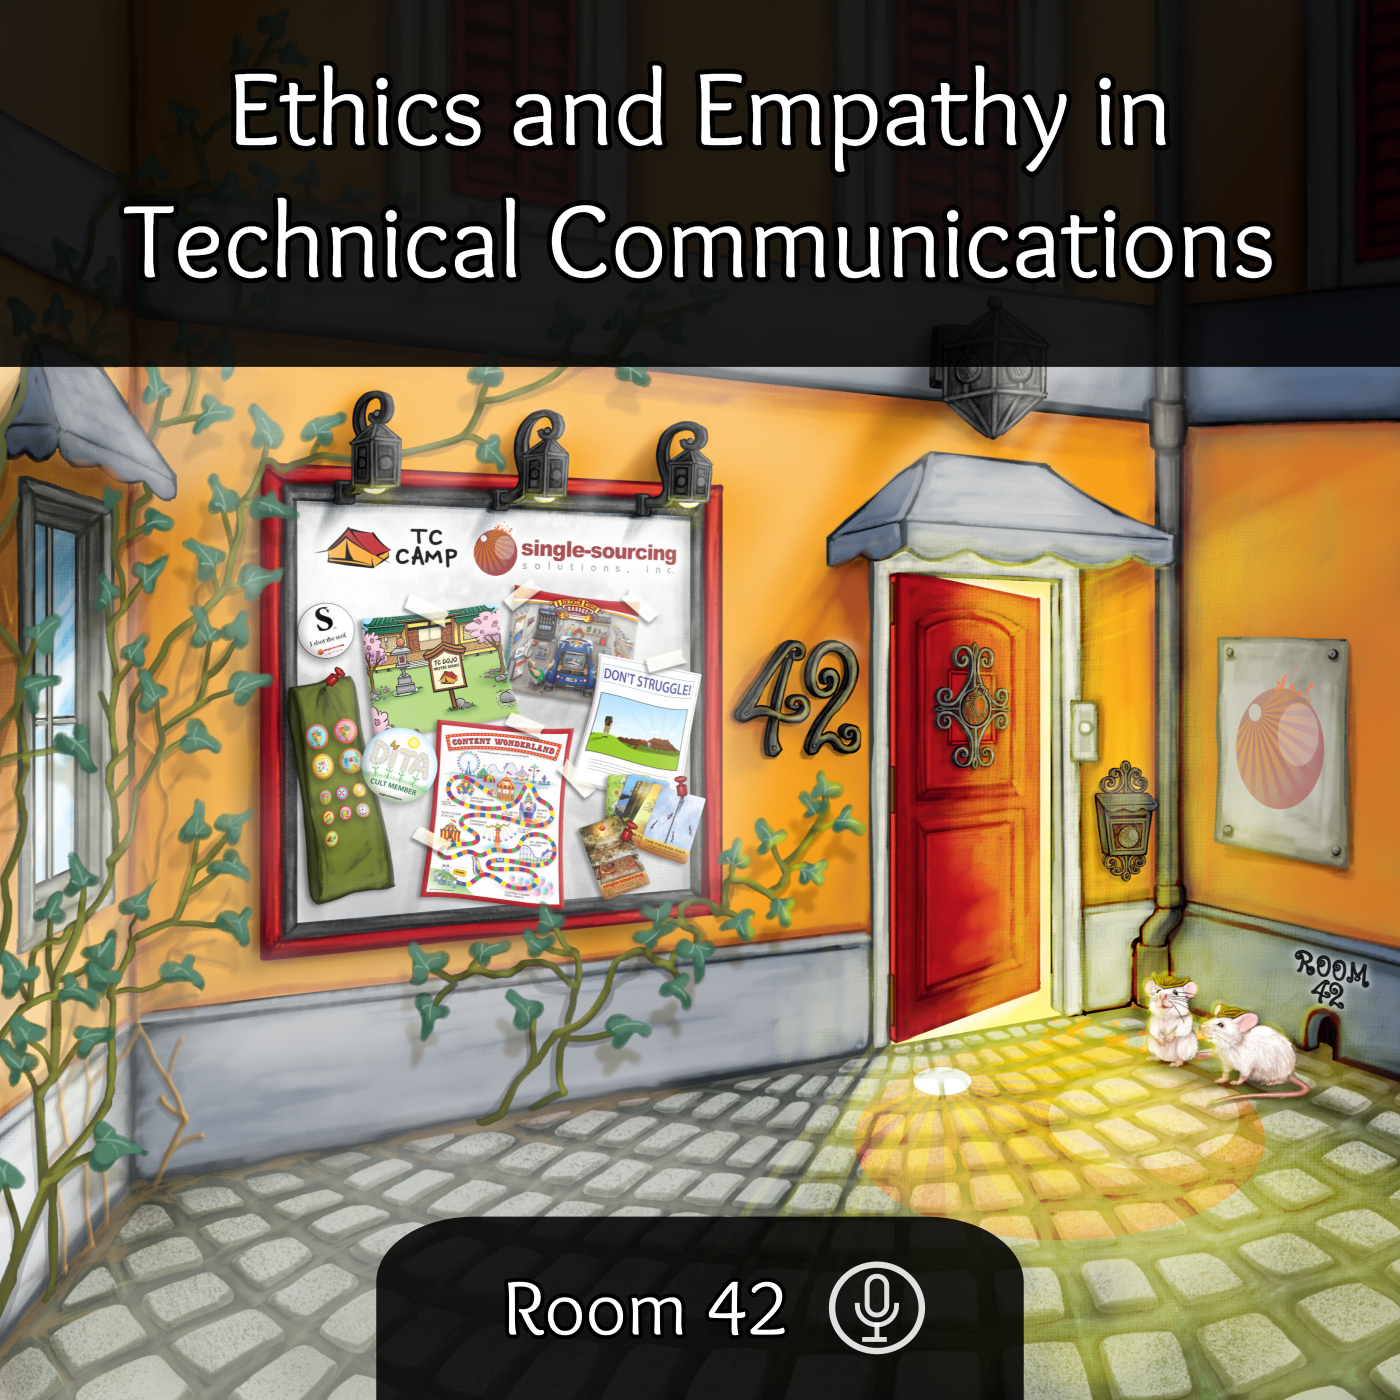 Ethics and Empathy in Communications